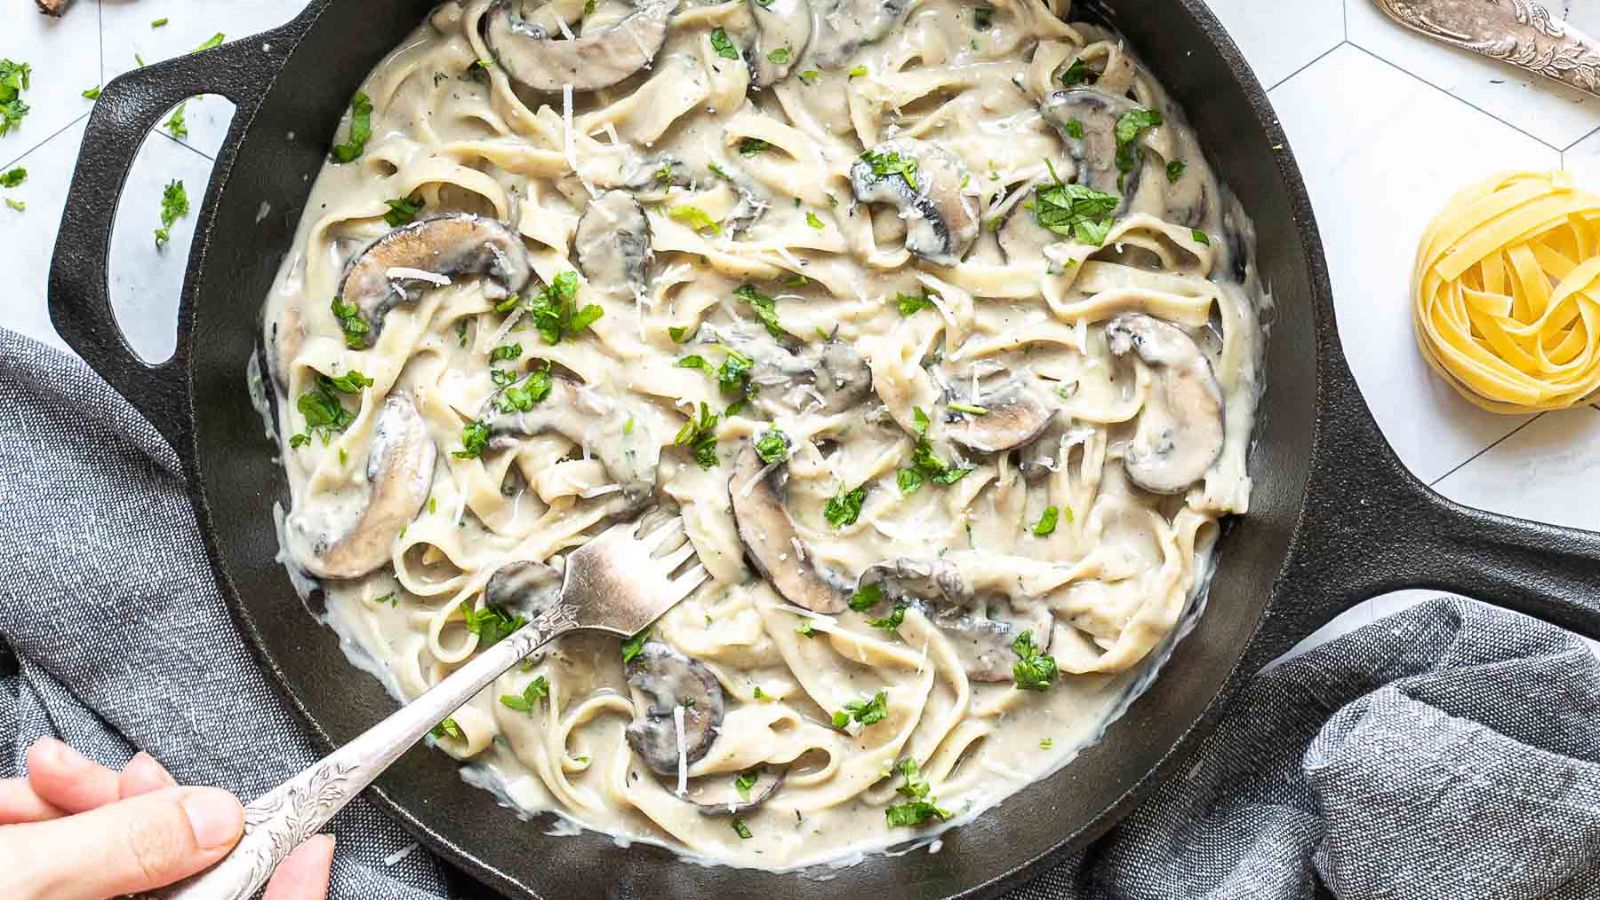 18 Unique Mushroom Recipes to Delight Your Palate